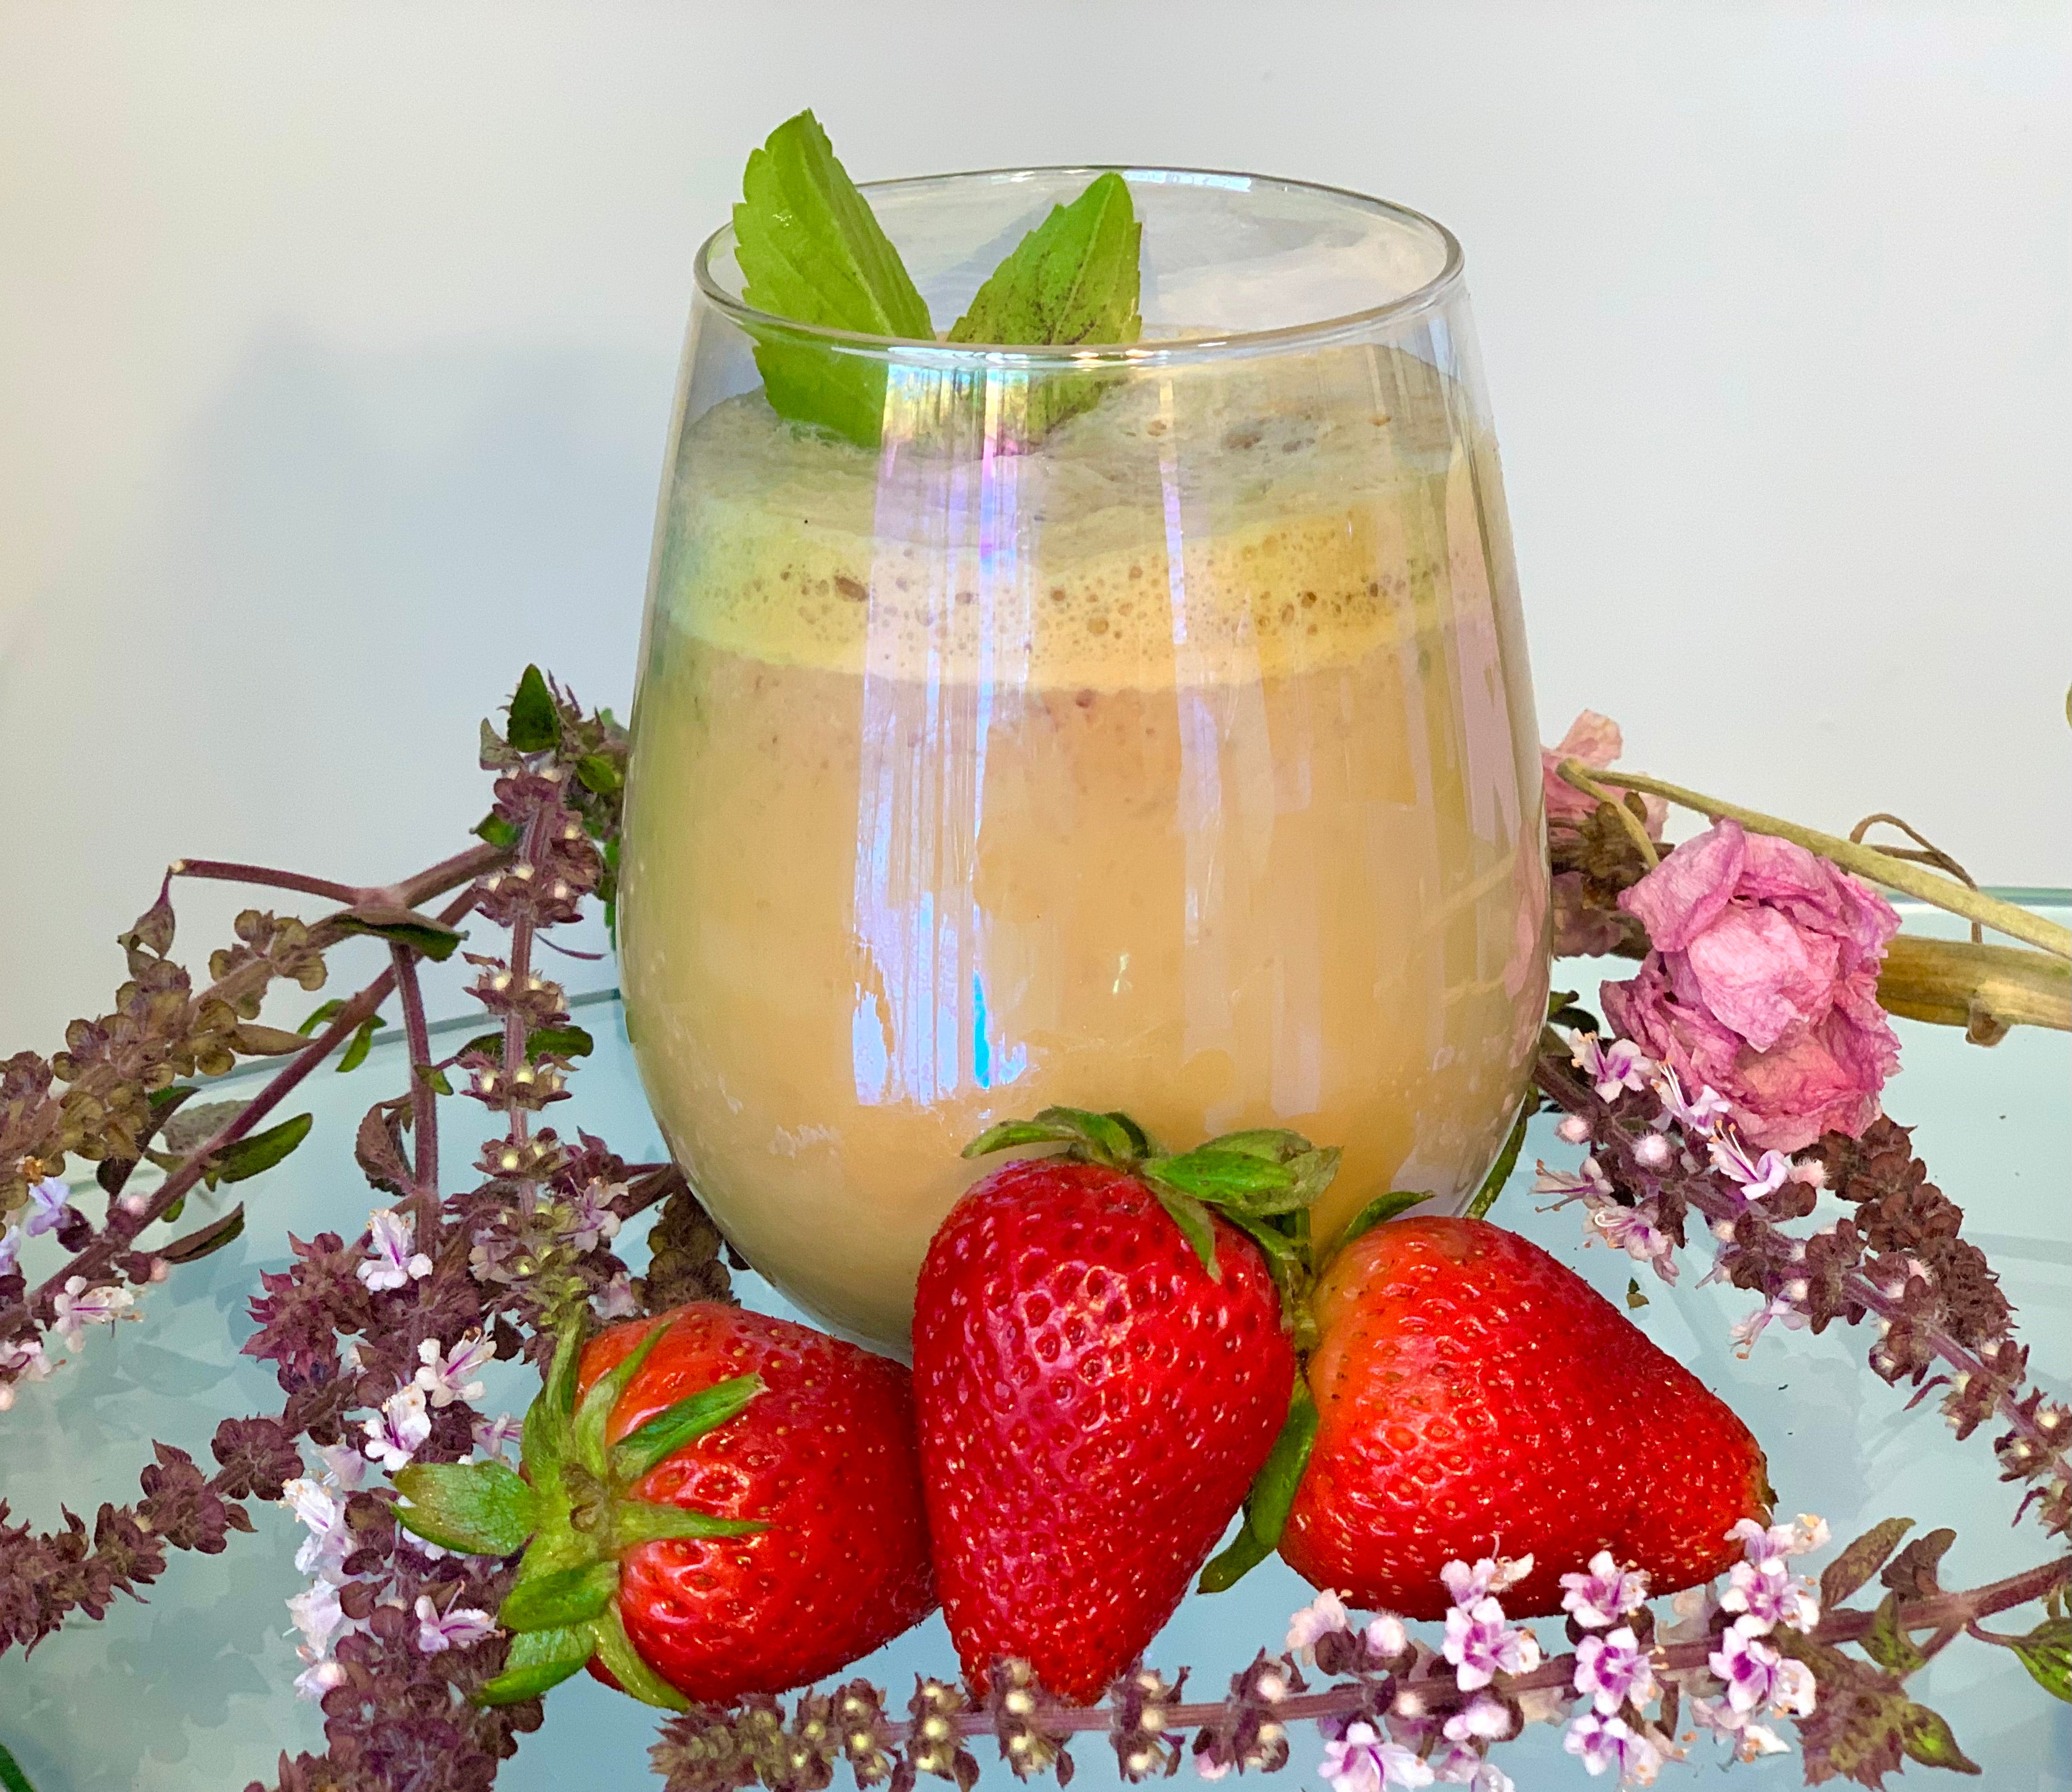 Iced latte in a glass cup surrounded by three strawberries and springs of flowering basil 